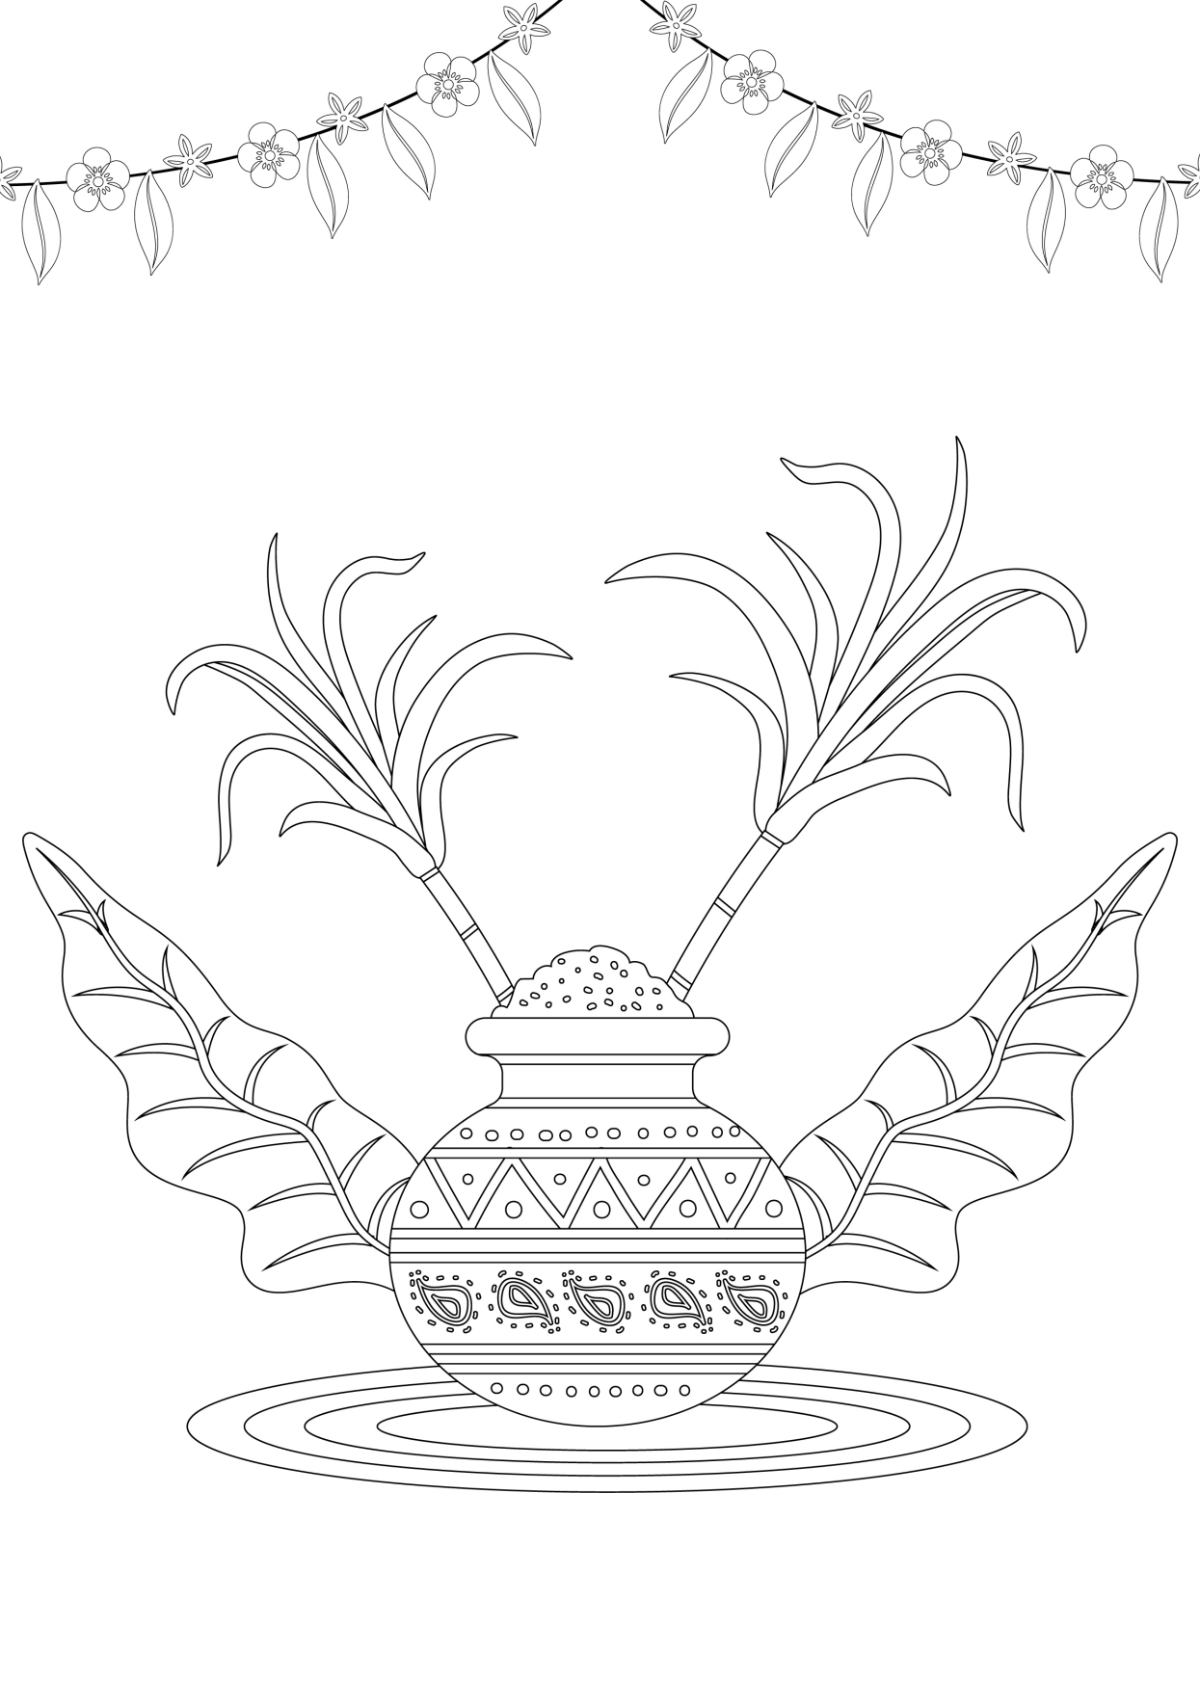 Pongal Celebration Drawing Template